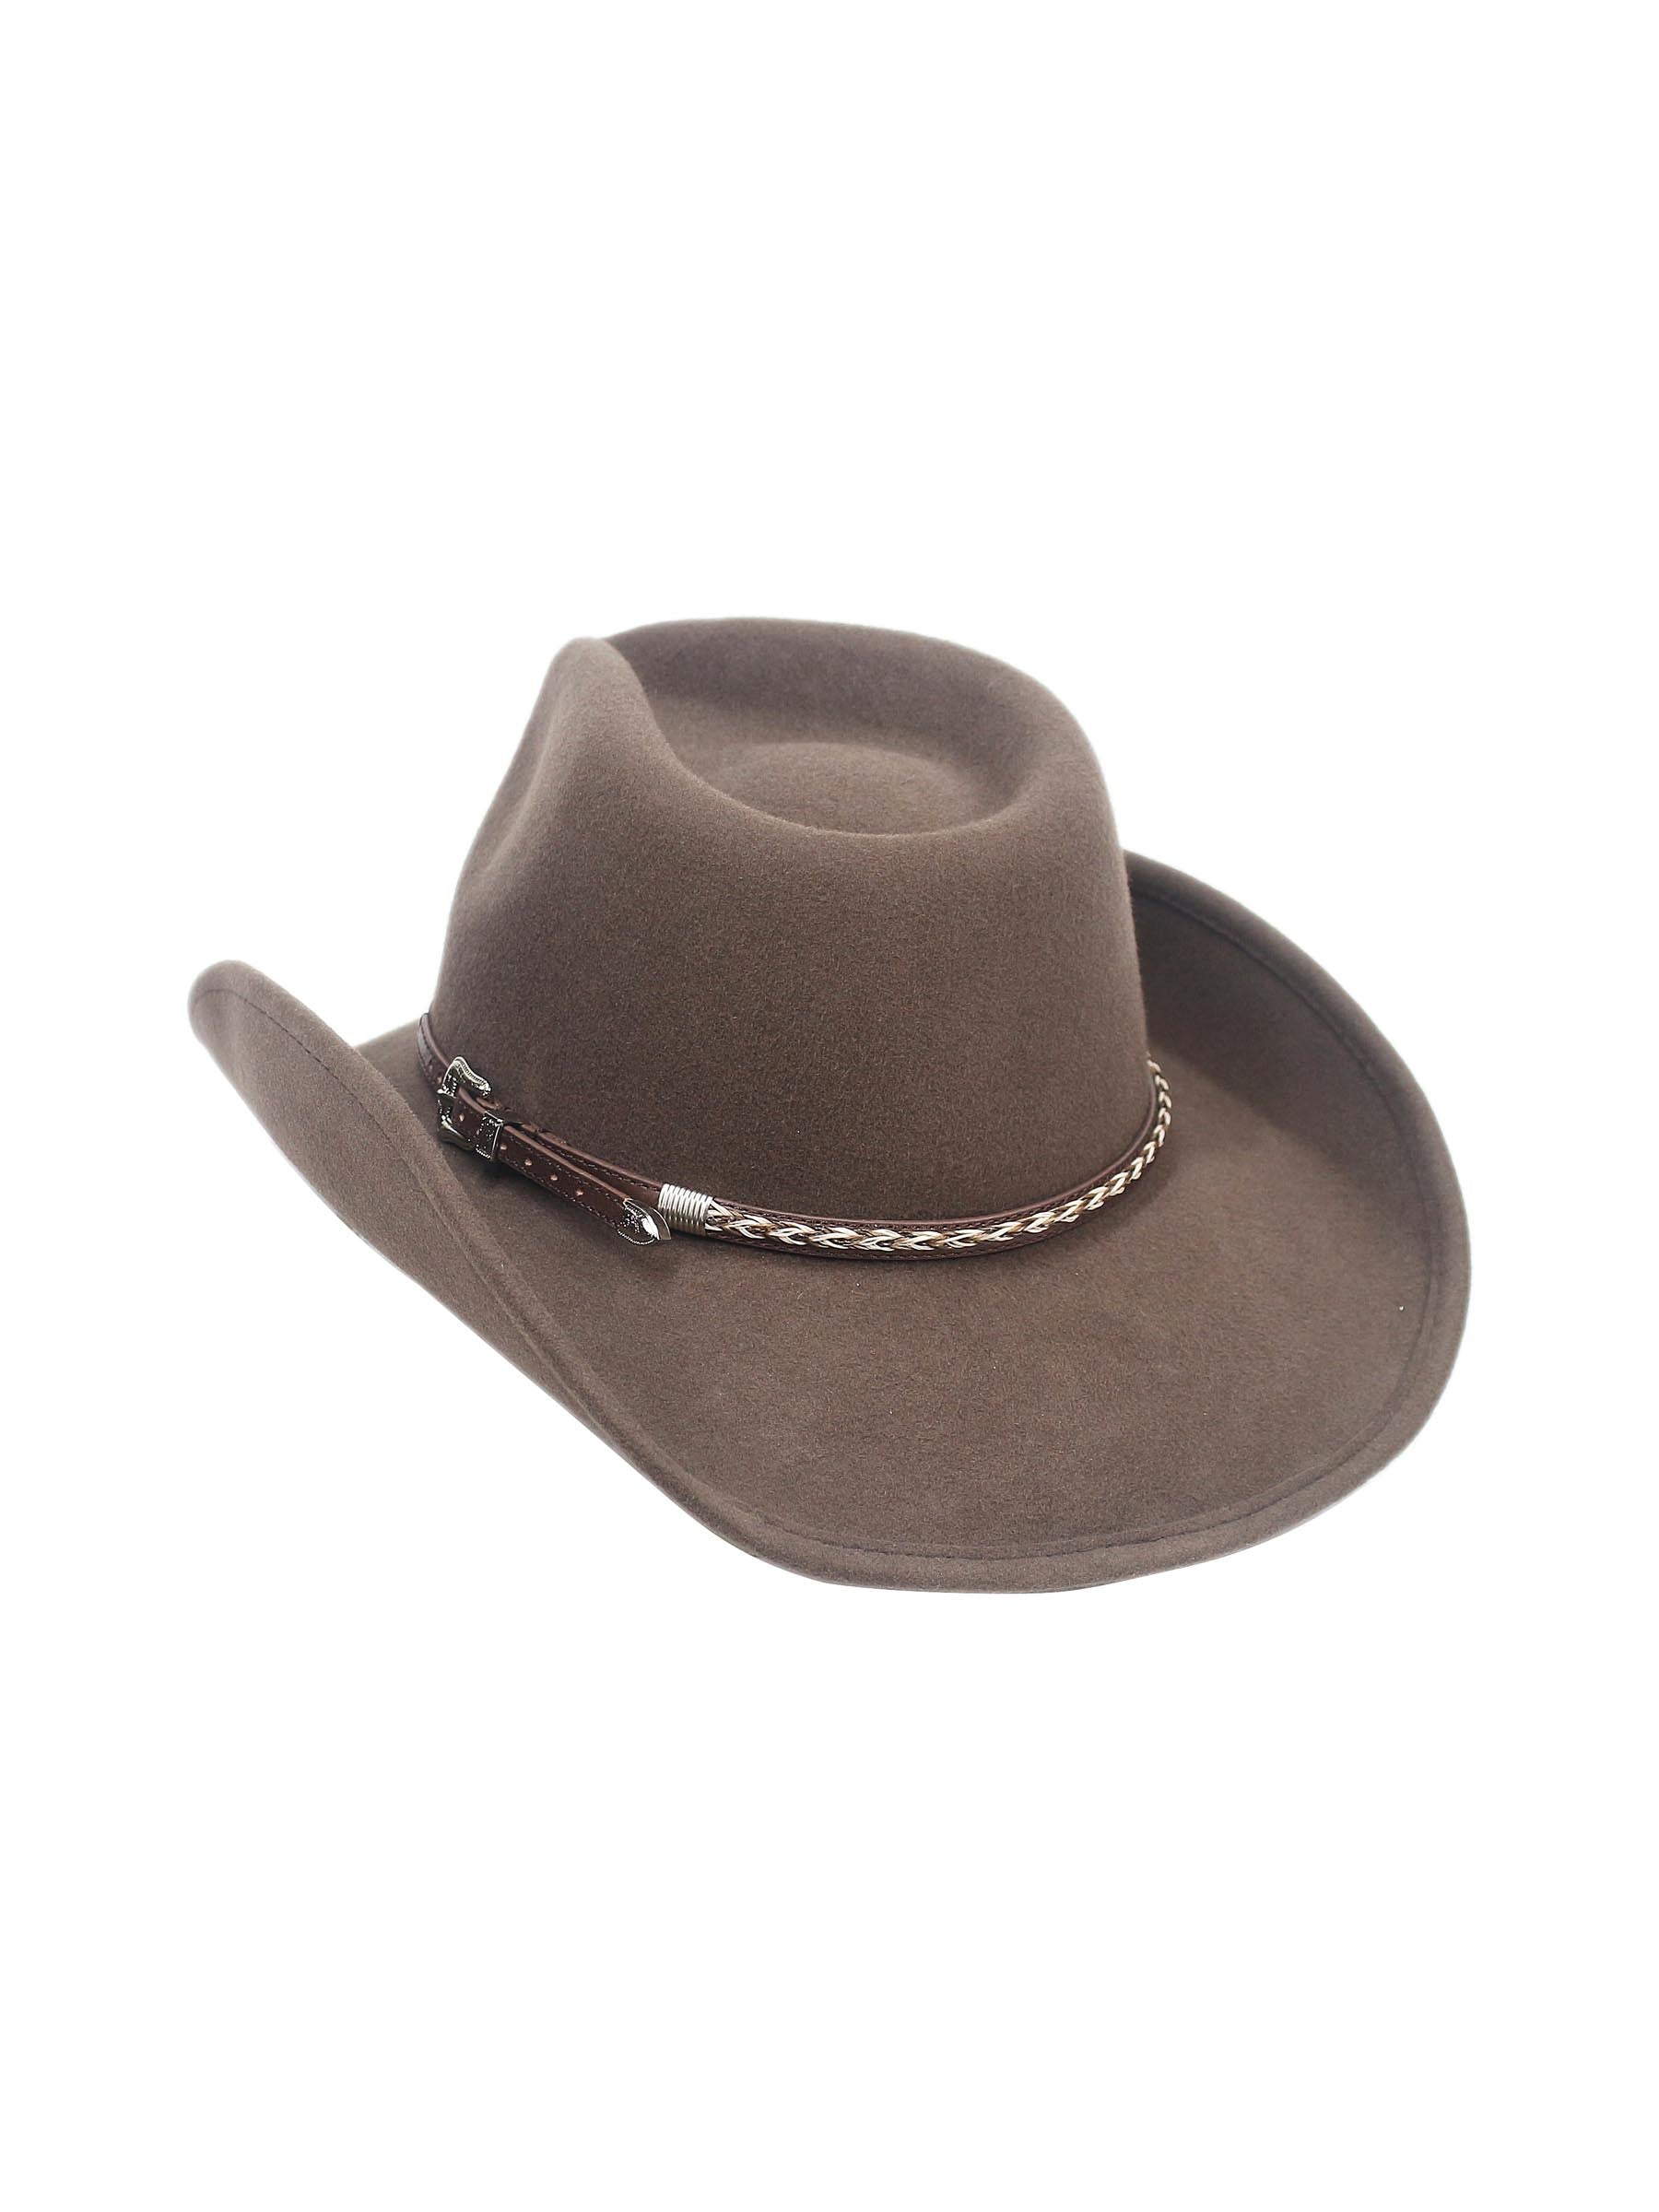 Western Hat Band for Cowboy Hats by Silver Canyon, Black Leather with Tan, Brown, Natural Braided Horsehair